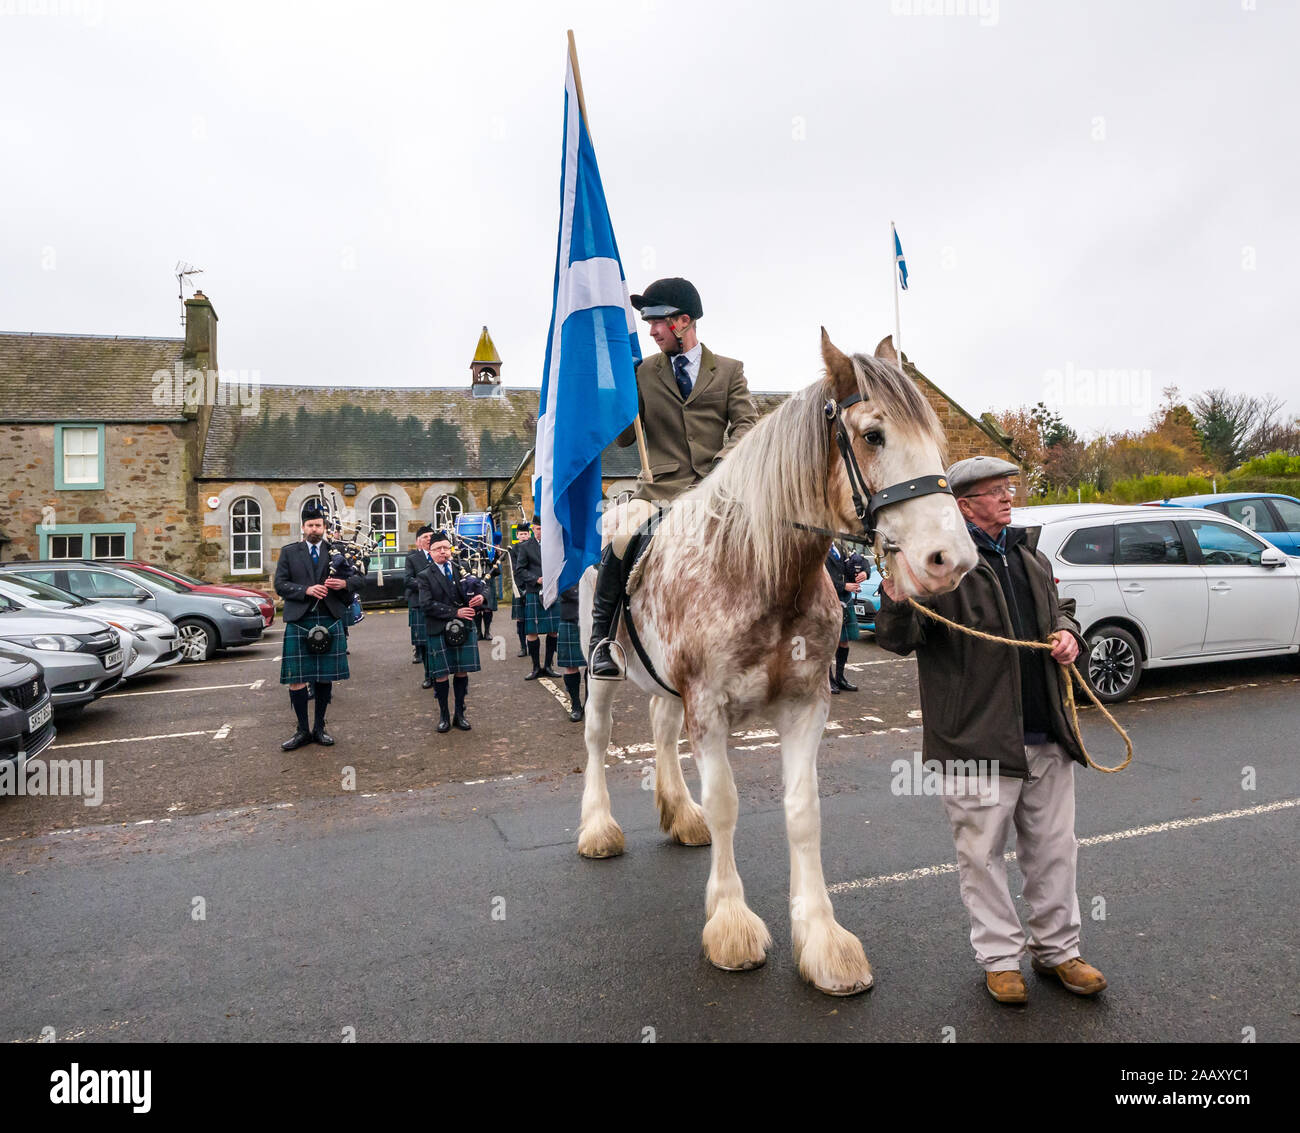 Athelstaneford, East Lothian, Scotland, UK. 24 November 2019. Saltire Festival: The first day of the annual festival to mark St Andrew’s Day takes place in the birthplace of the Scottish national flag where the saltire appeared in the sky as a good omen when the Picts & Scots defeated the Saxons led by Athelstan. Pictured: Craig Donnelly on a Strawberry Roan Clydesdale mare with groom/owner Arthur Greenan with Haddington Pipe Band Stock Photo